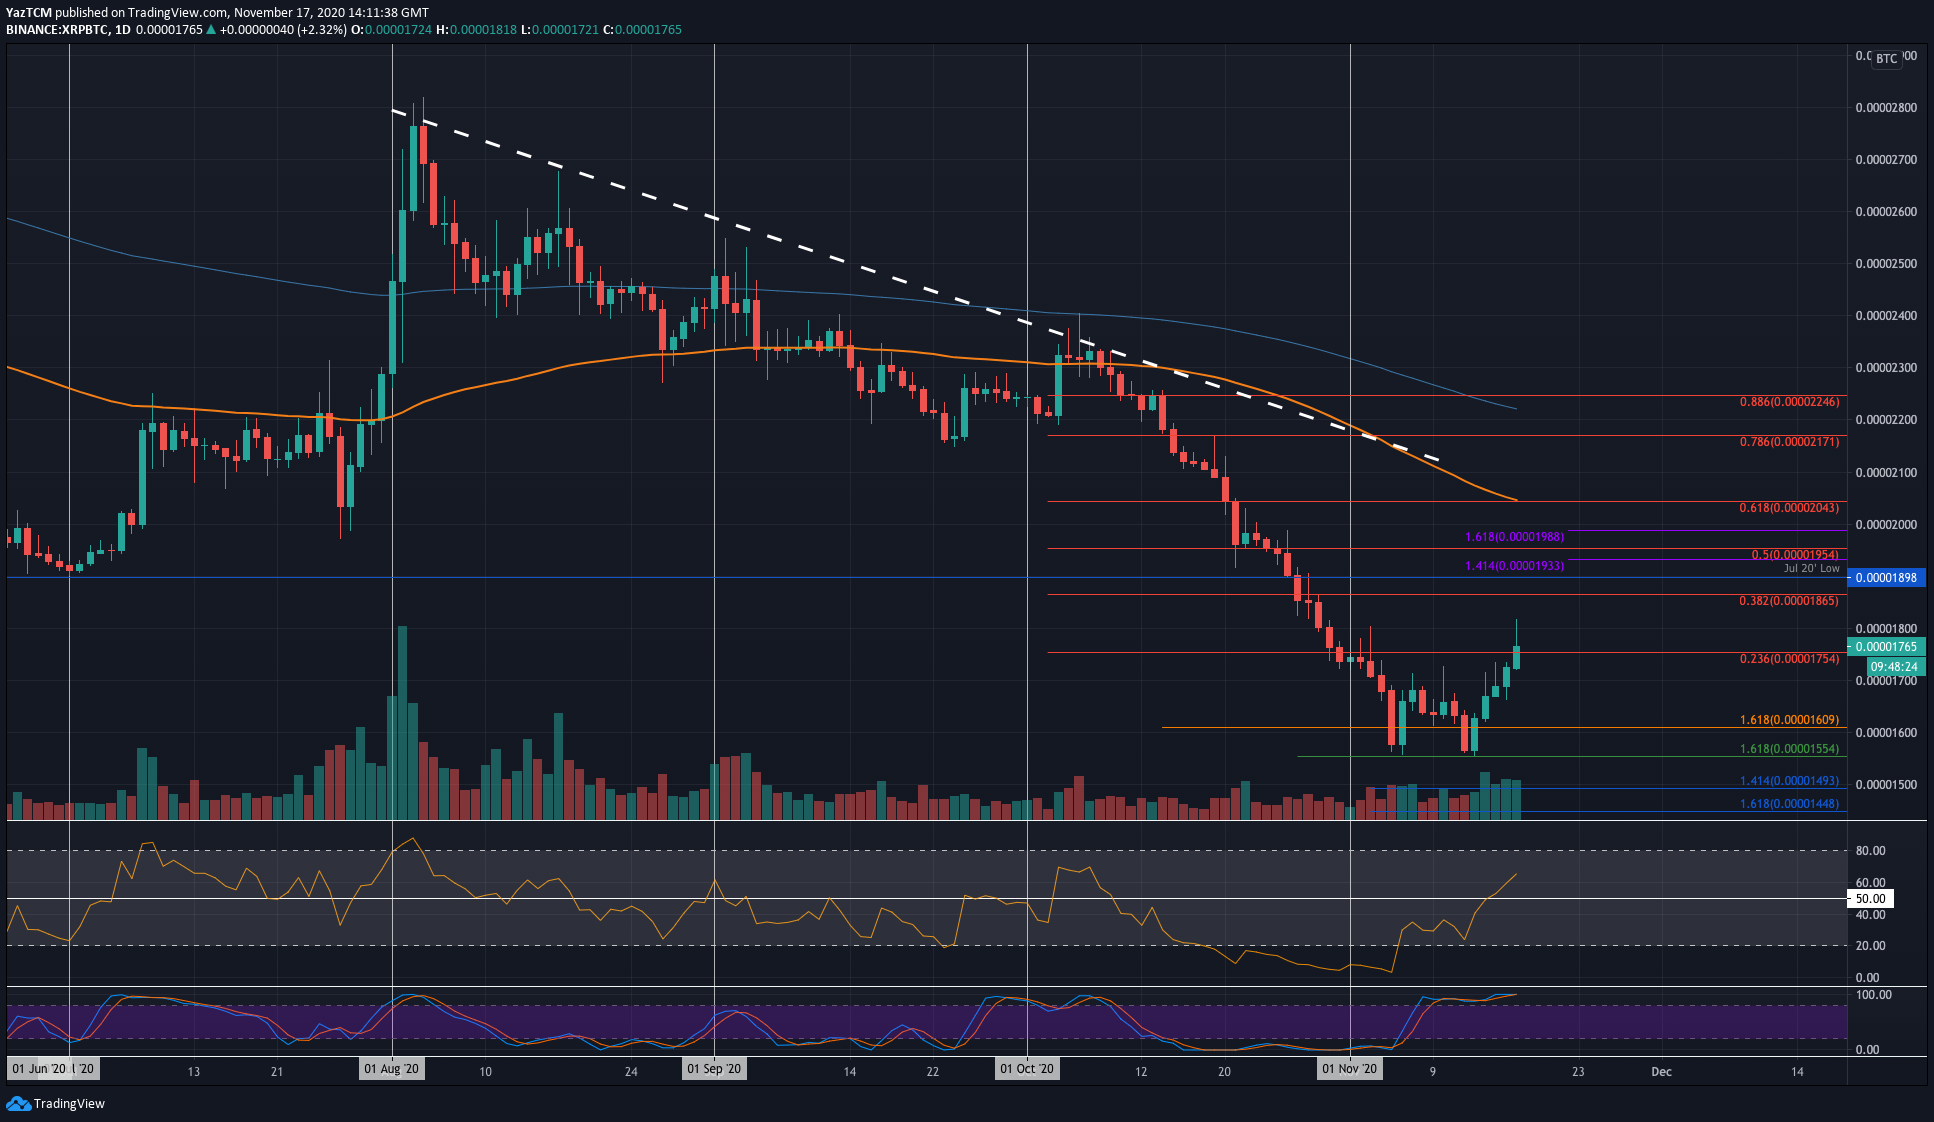 XRP Facing Crucial Resistance at $0.30, First Time in 76 Days (Ripple Price Analysis)